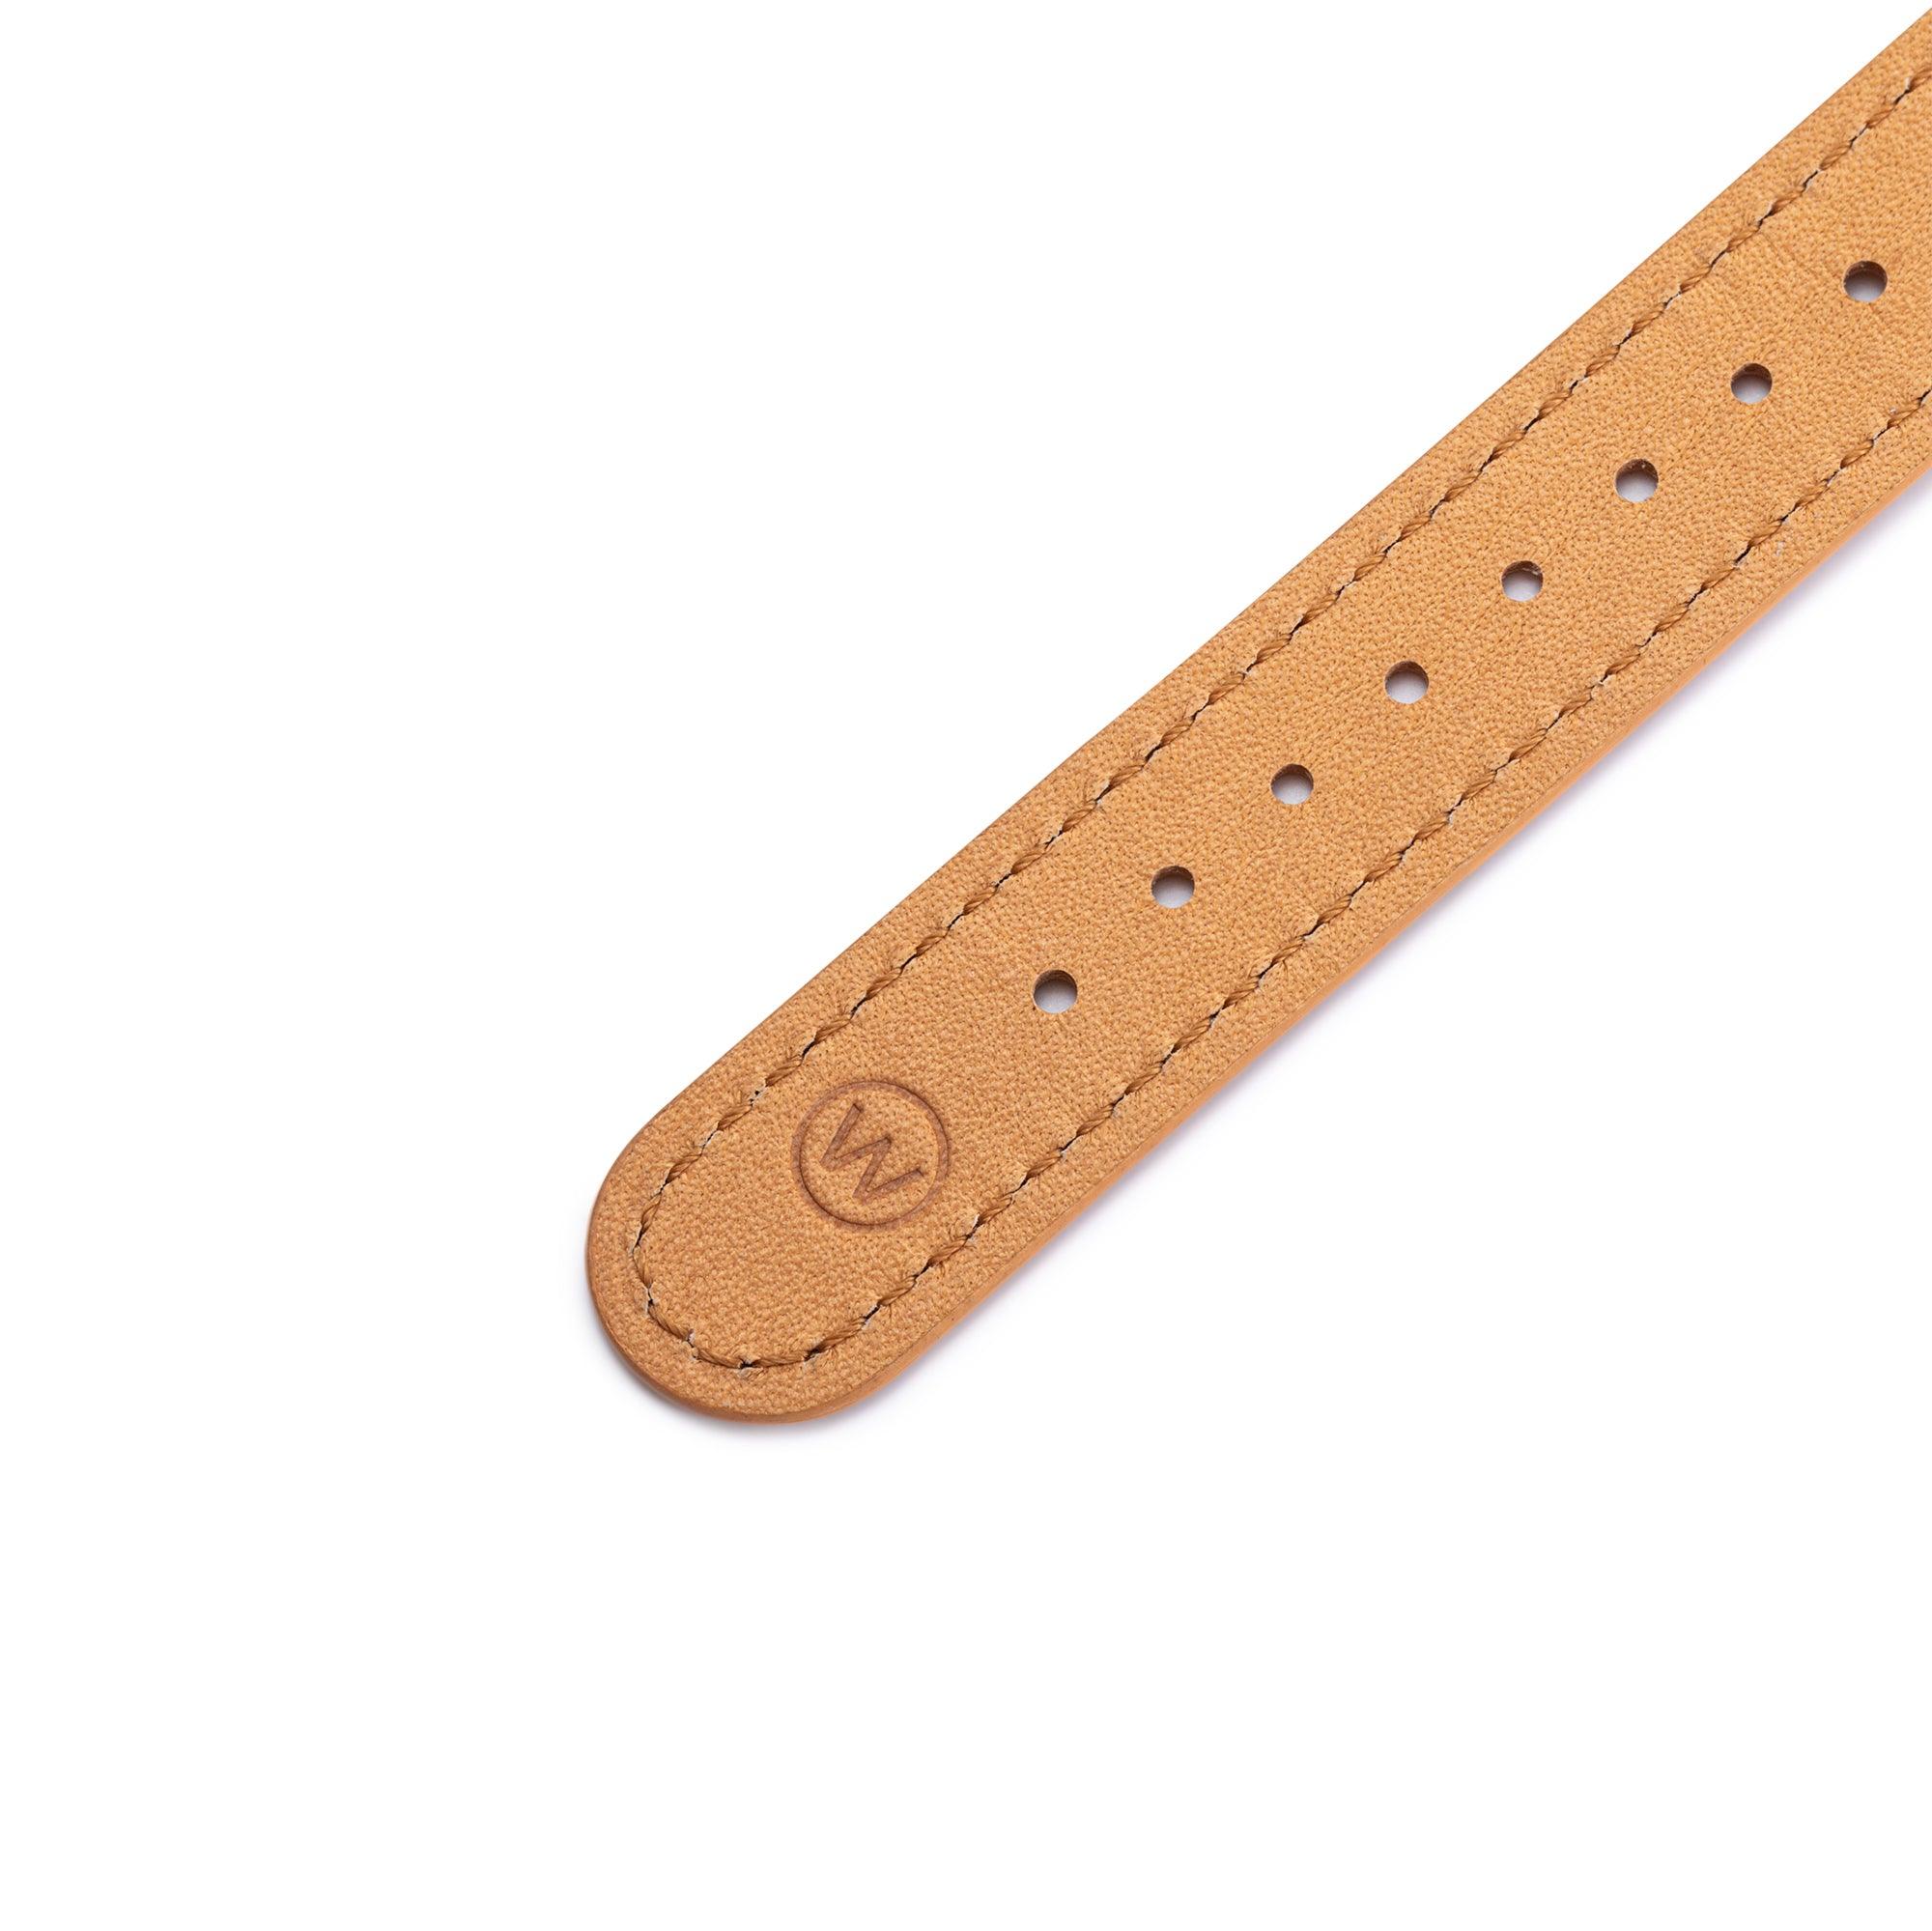 One-Piece Camel Tapered Leather Band & Steel Buckle - Wolbrook Watches